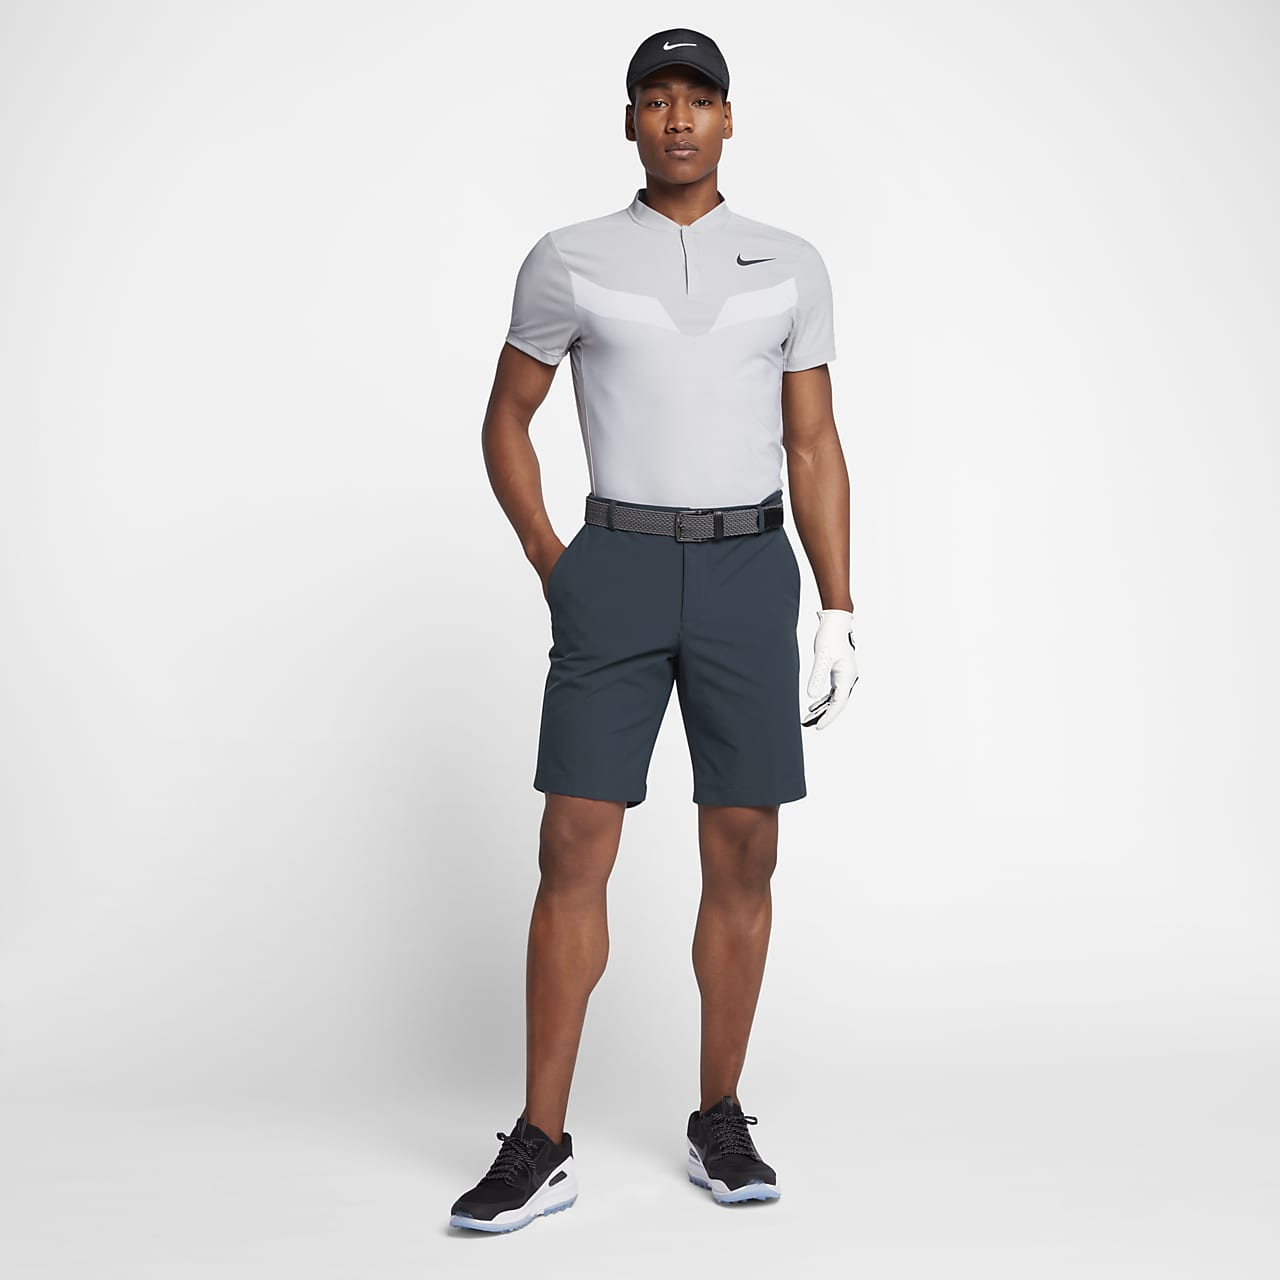 modern golf outfit for Sale OFF 67%